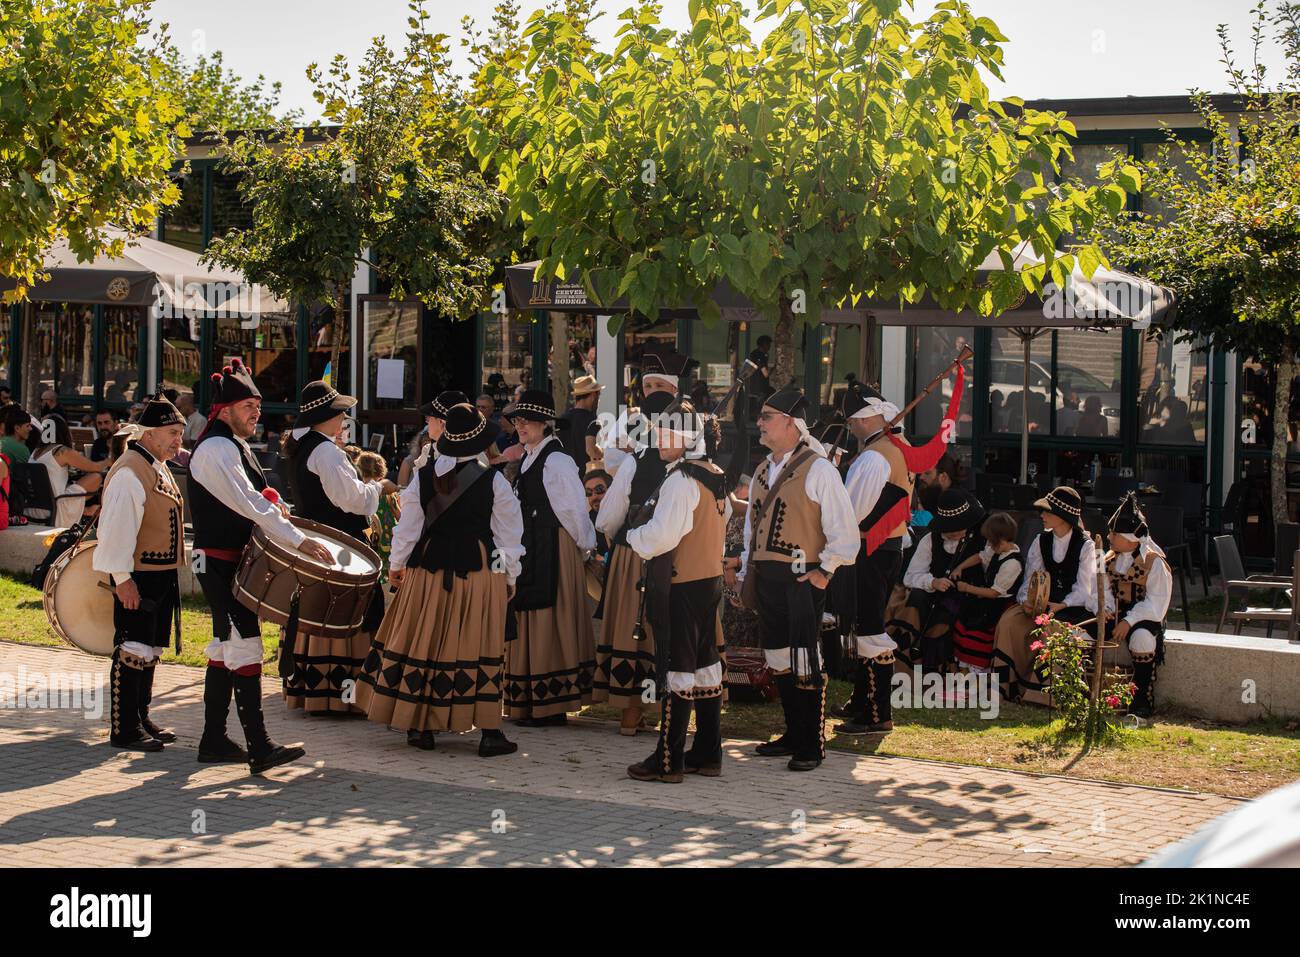 Galician traditional dance at cultural meeting between Ukraine and Galicia. Stock Photo